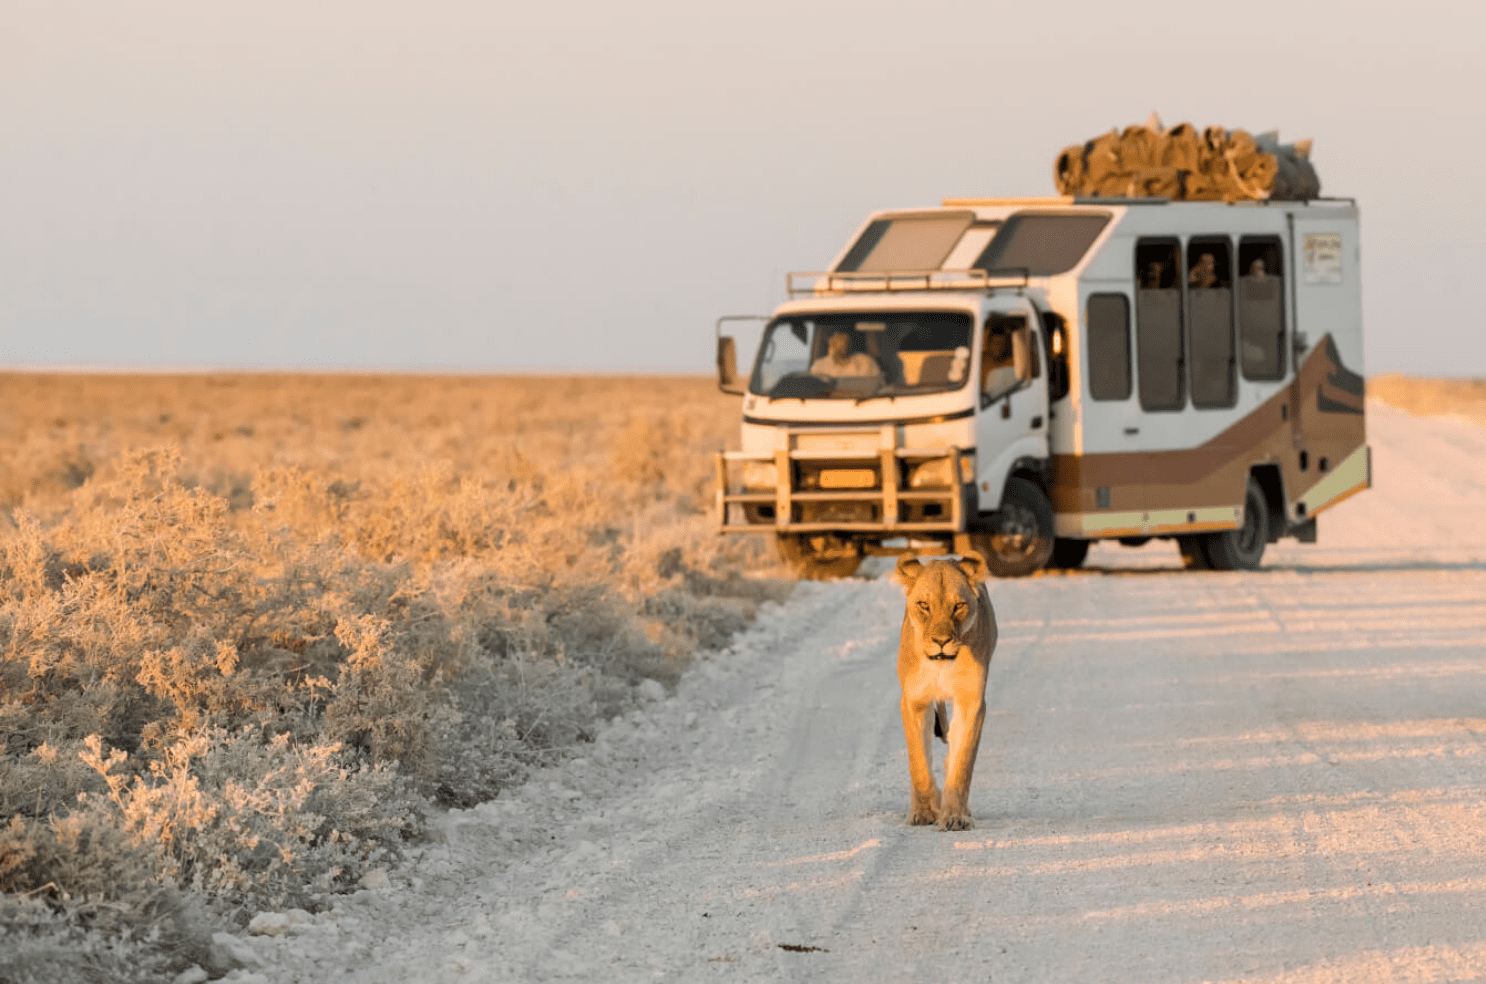 Lion on the road and safari vehicle